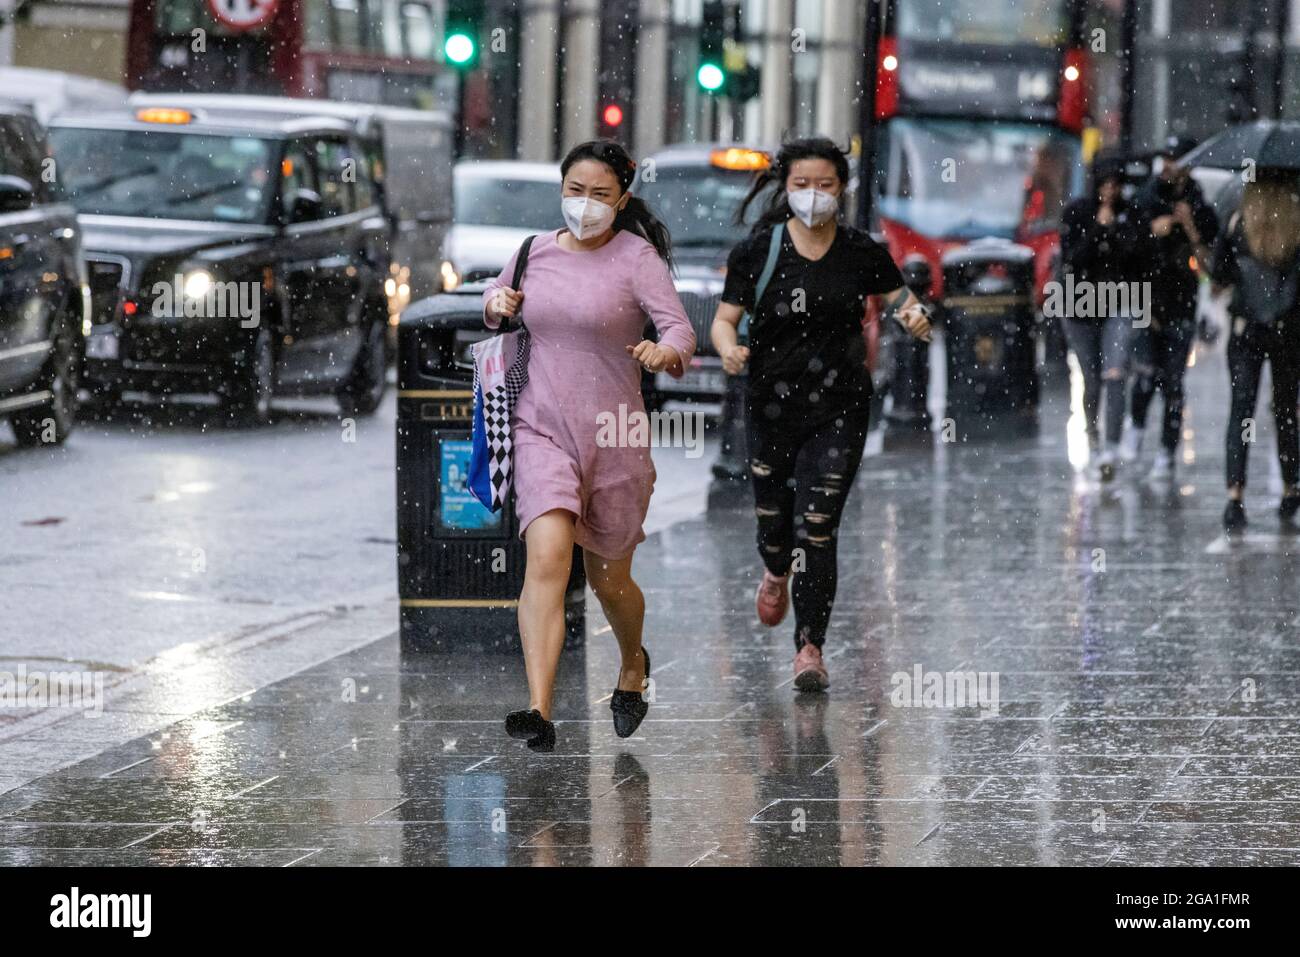 London, UK. July 28 2021: Heavy Rain Showers hit Knightsbridge, Central London, England, UK Picture shows tourists running for cover in the rain as heavy rain showers sweep across Central London and southern parts of England. Credit: Clickpics/Alamy Live News Stock Photo